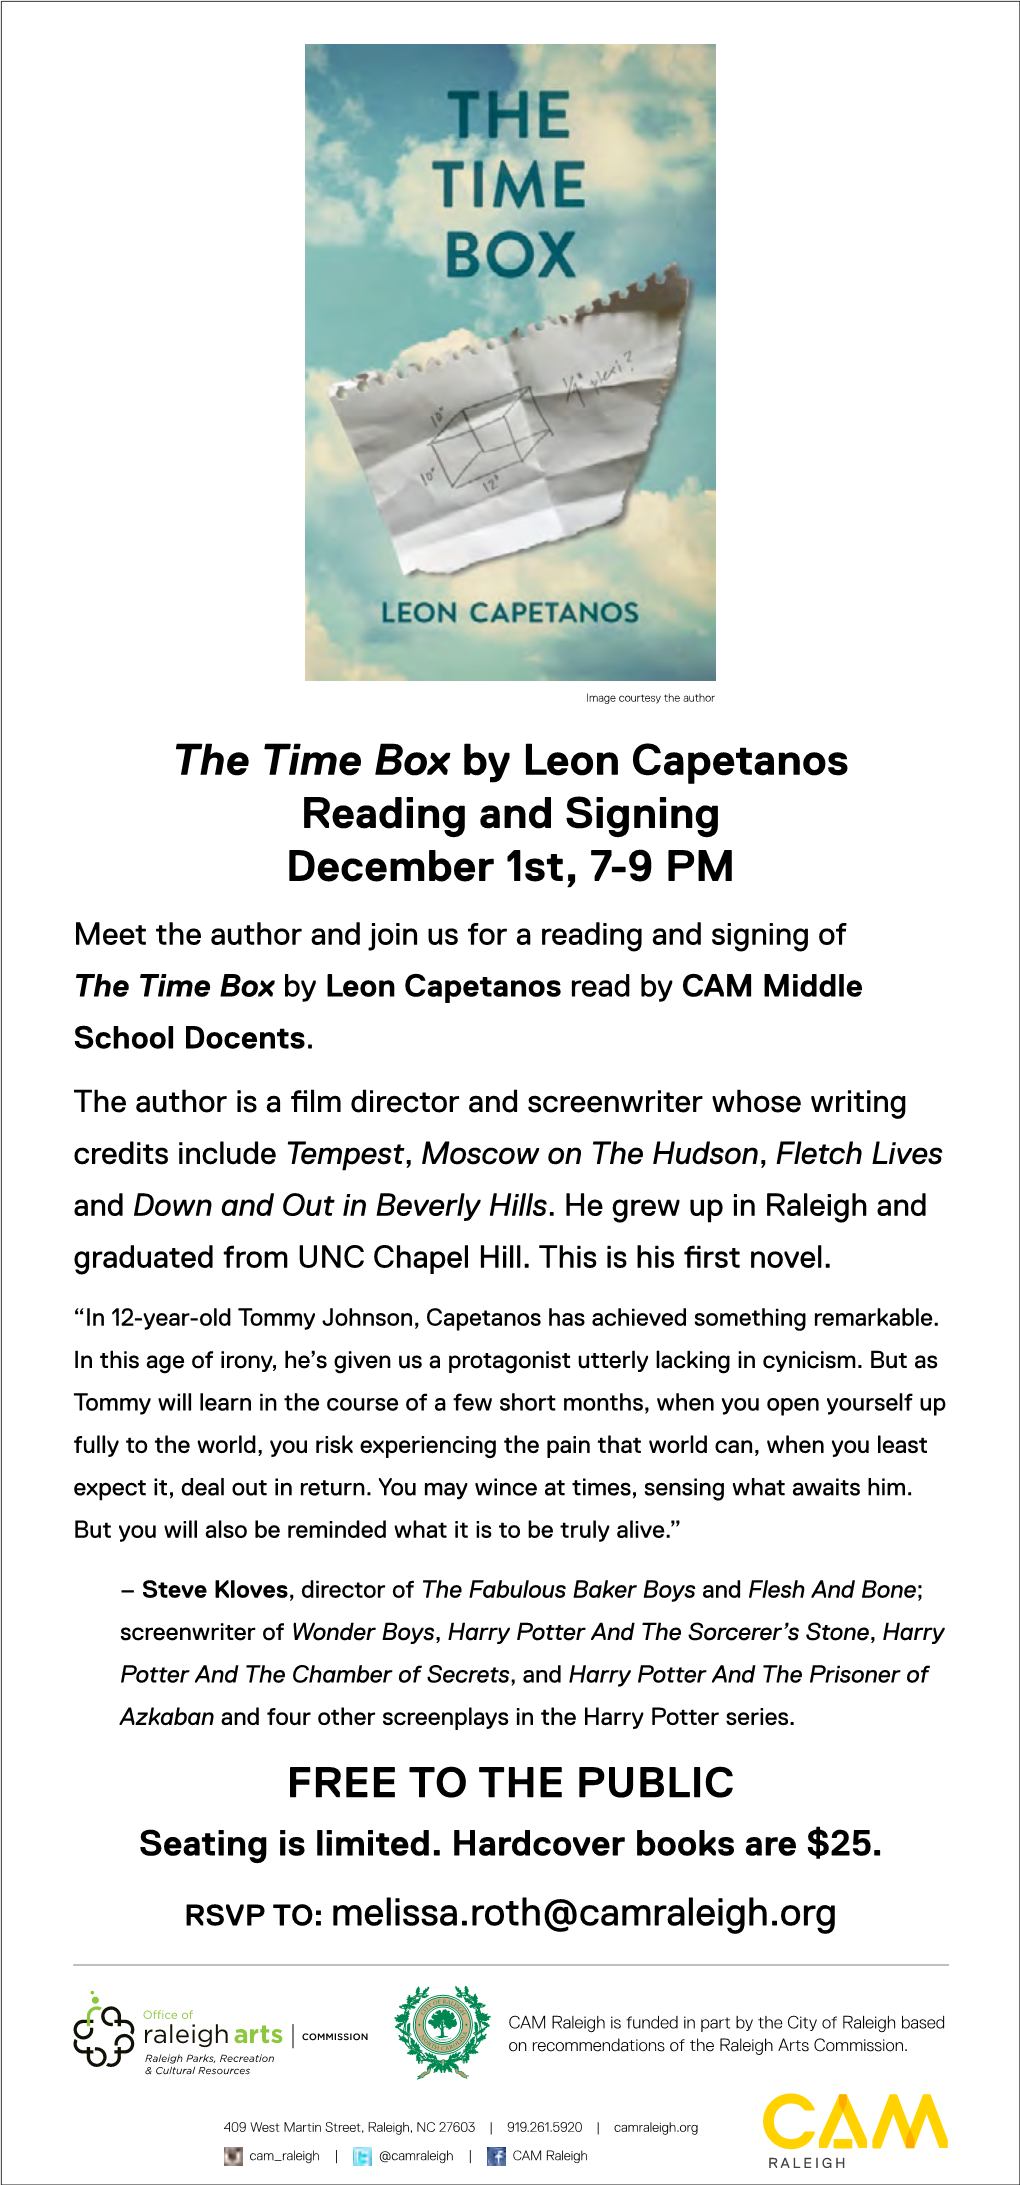 The Time Box by Leon Capetanos Reading and Signing December 1St